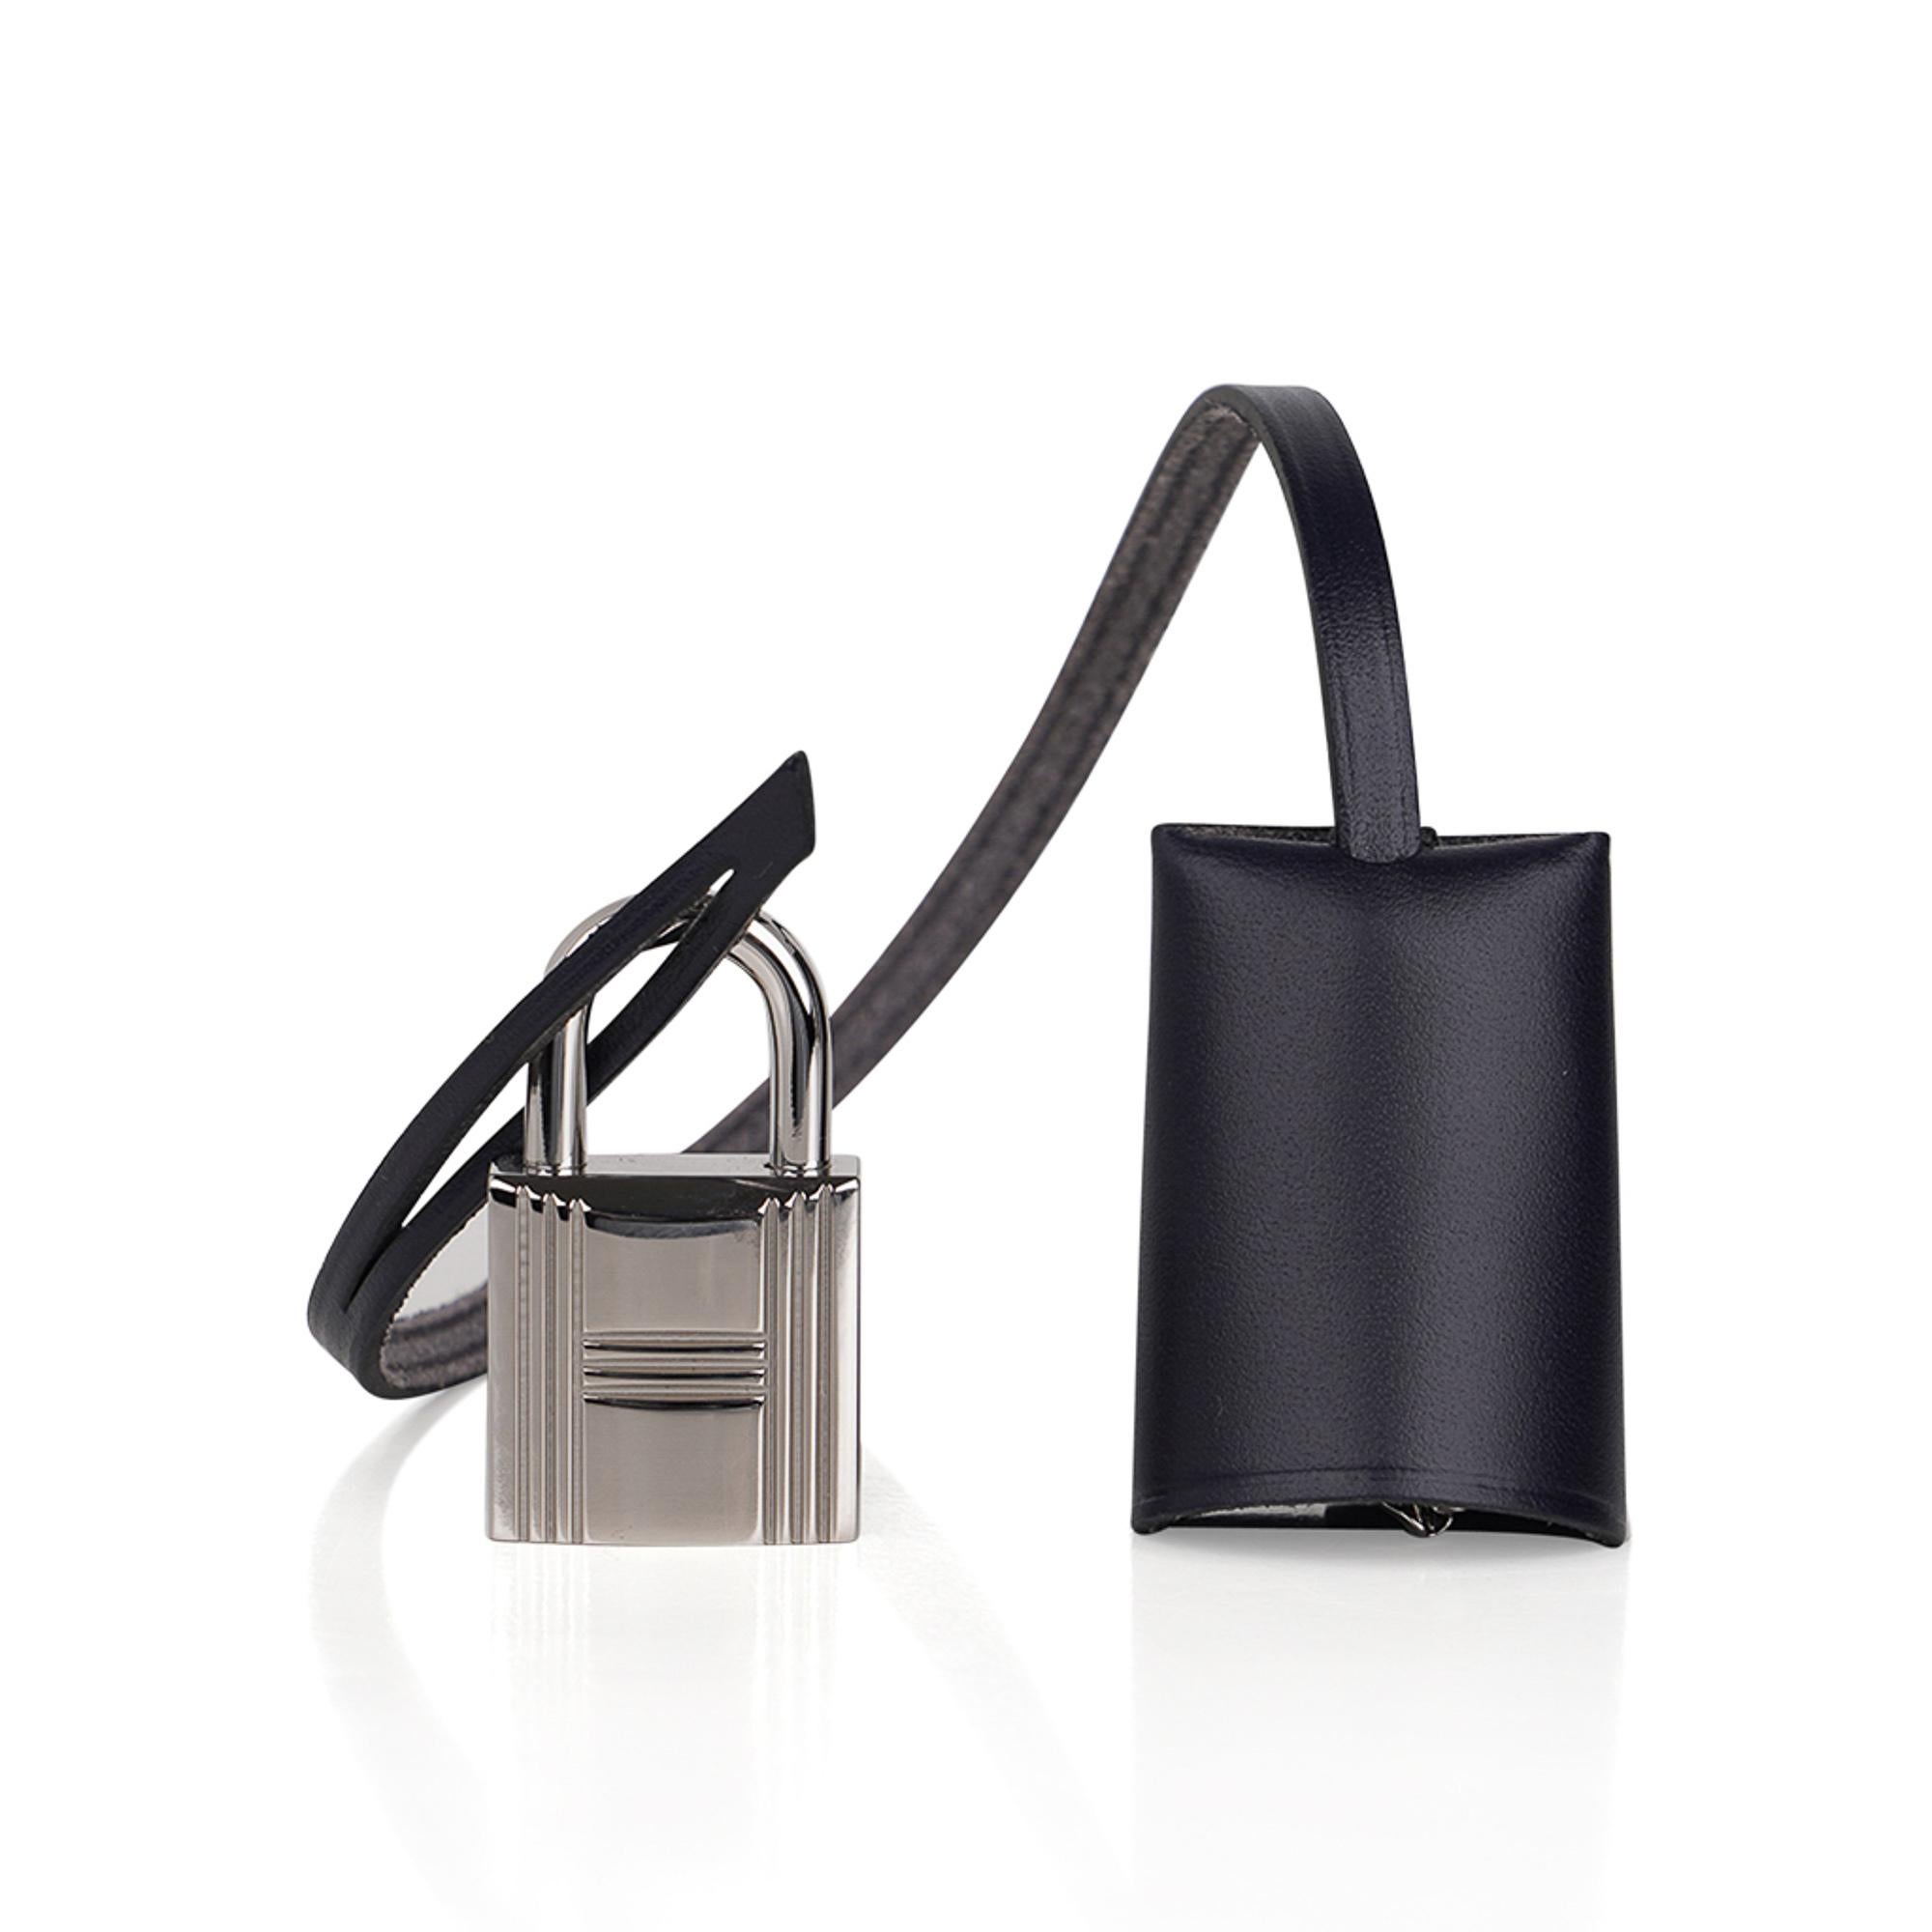 Mightychic offers a guaranteed authentic  Hermes Herbag Zip 31 featured in Black Toile and Blue Indigo Vache Hunter leather.
Blue Indigo top with Black straps.
Chic rich combination!
Signature Herbag Clou de Selle Palladium hardware.
Has a matching